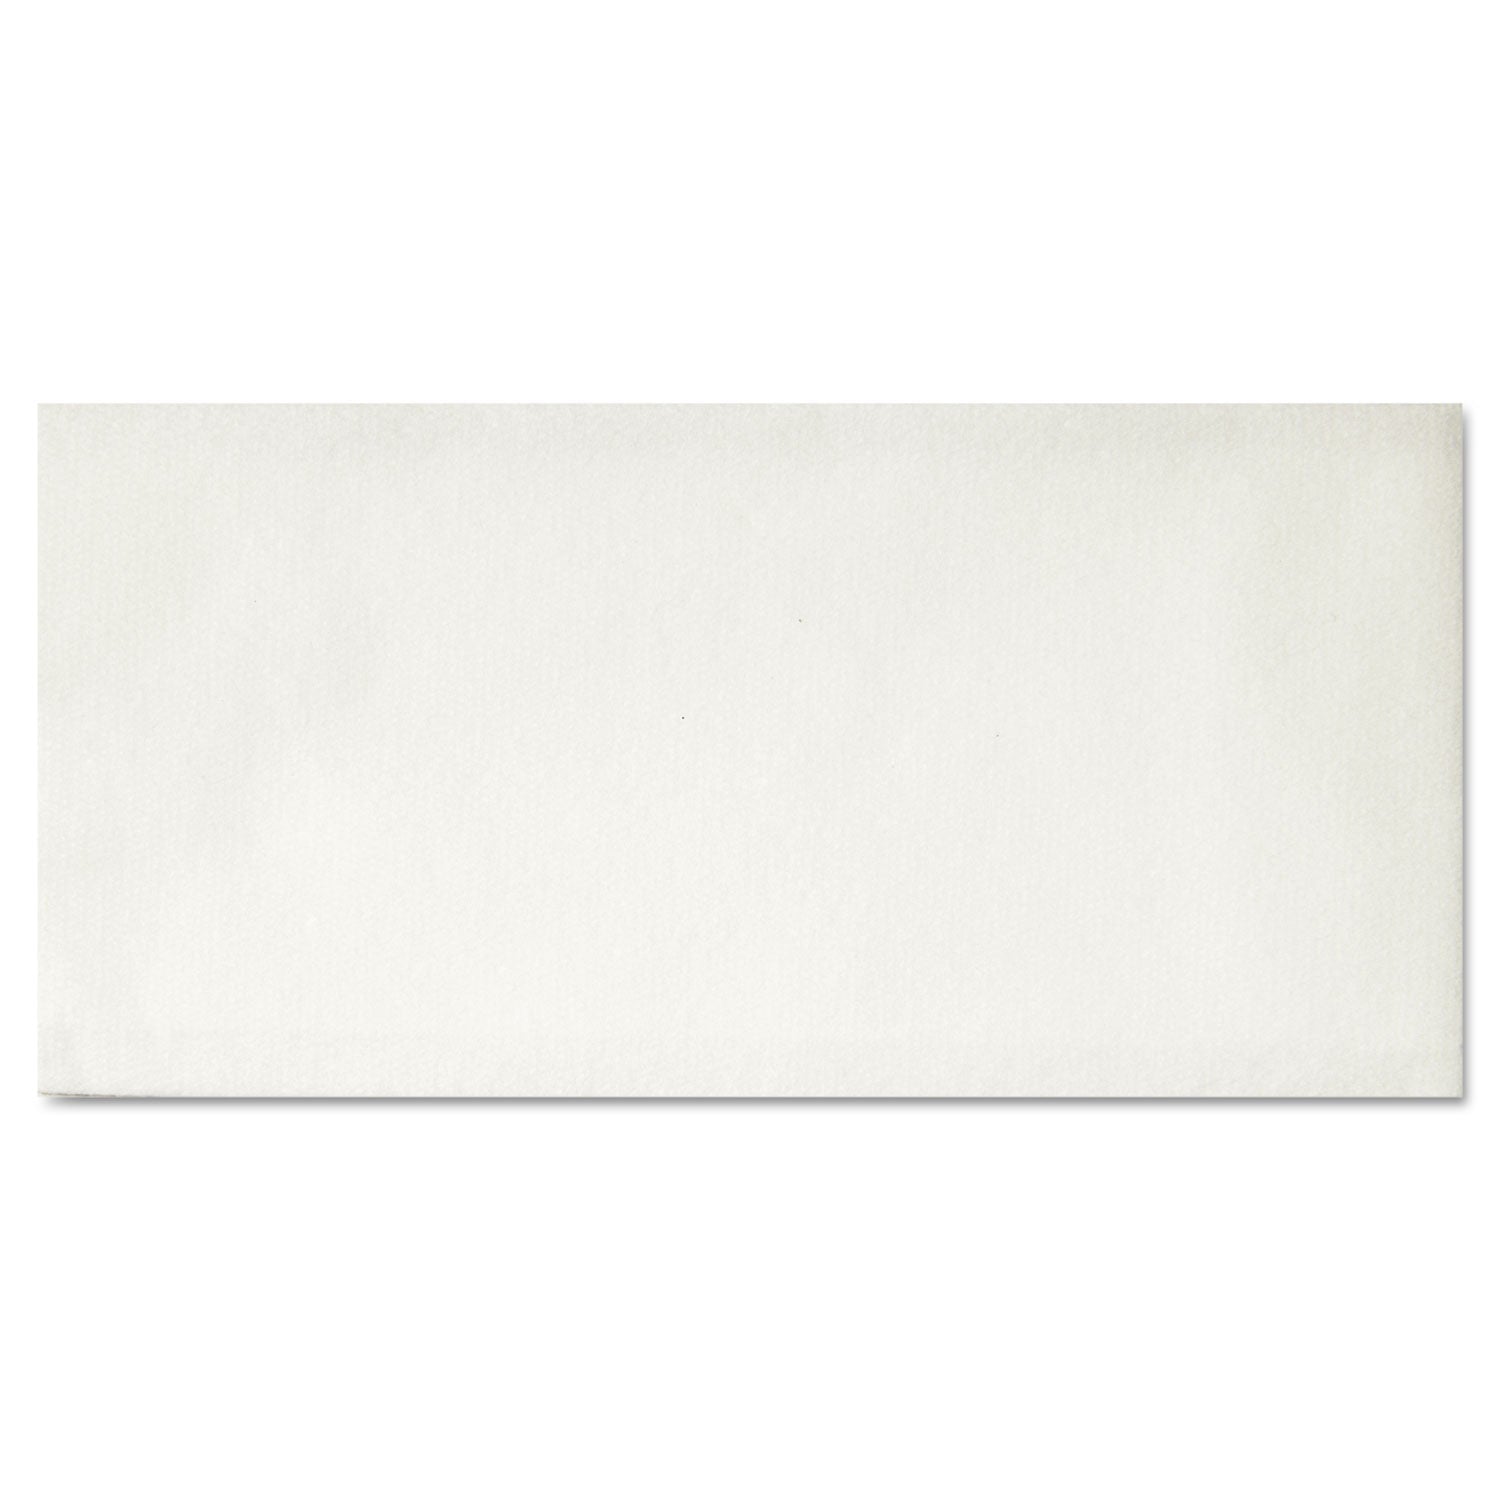 Hoffmaster Linen-Like Guest Towels, 12 X 17, White, 125 Towels/Pack, 4 Packs/Carton - HFM856499